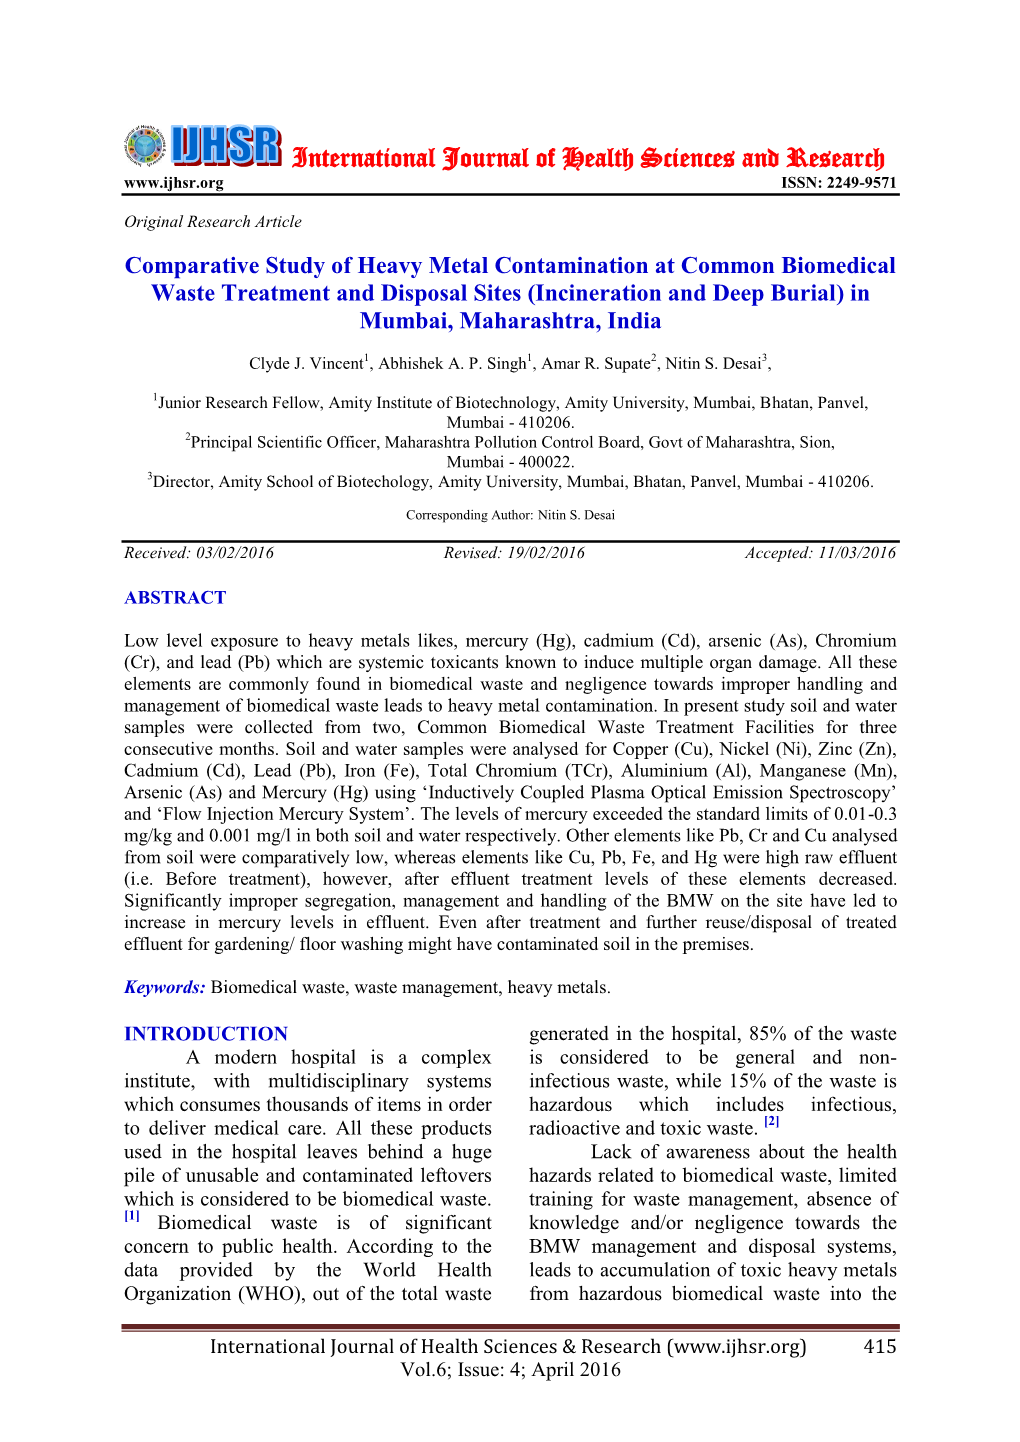 Comparative Study of Heavy Metal Contamination at Common Biomedical Waste Treatment and Disposal Sites (Incineration and Deep Burial) in Mumbai, Maharashtra, India